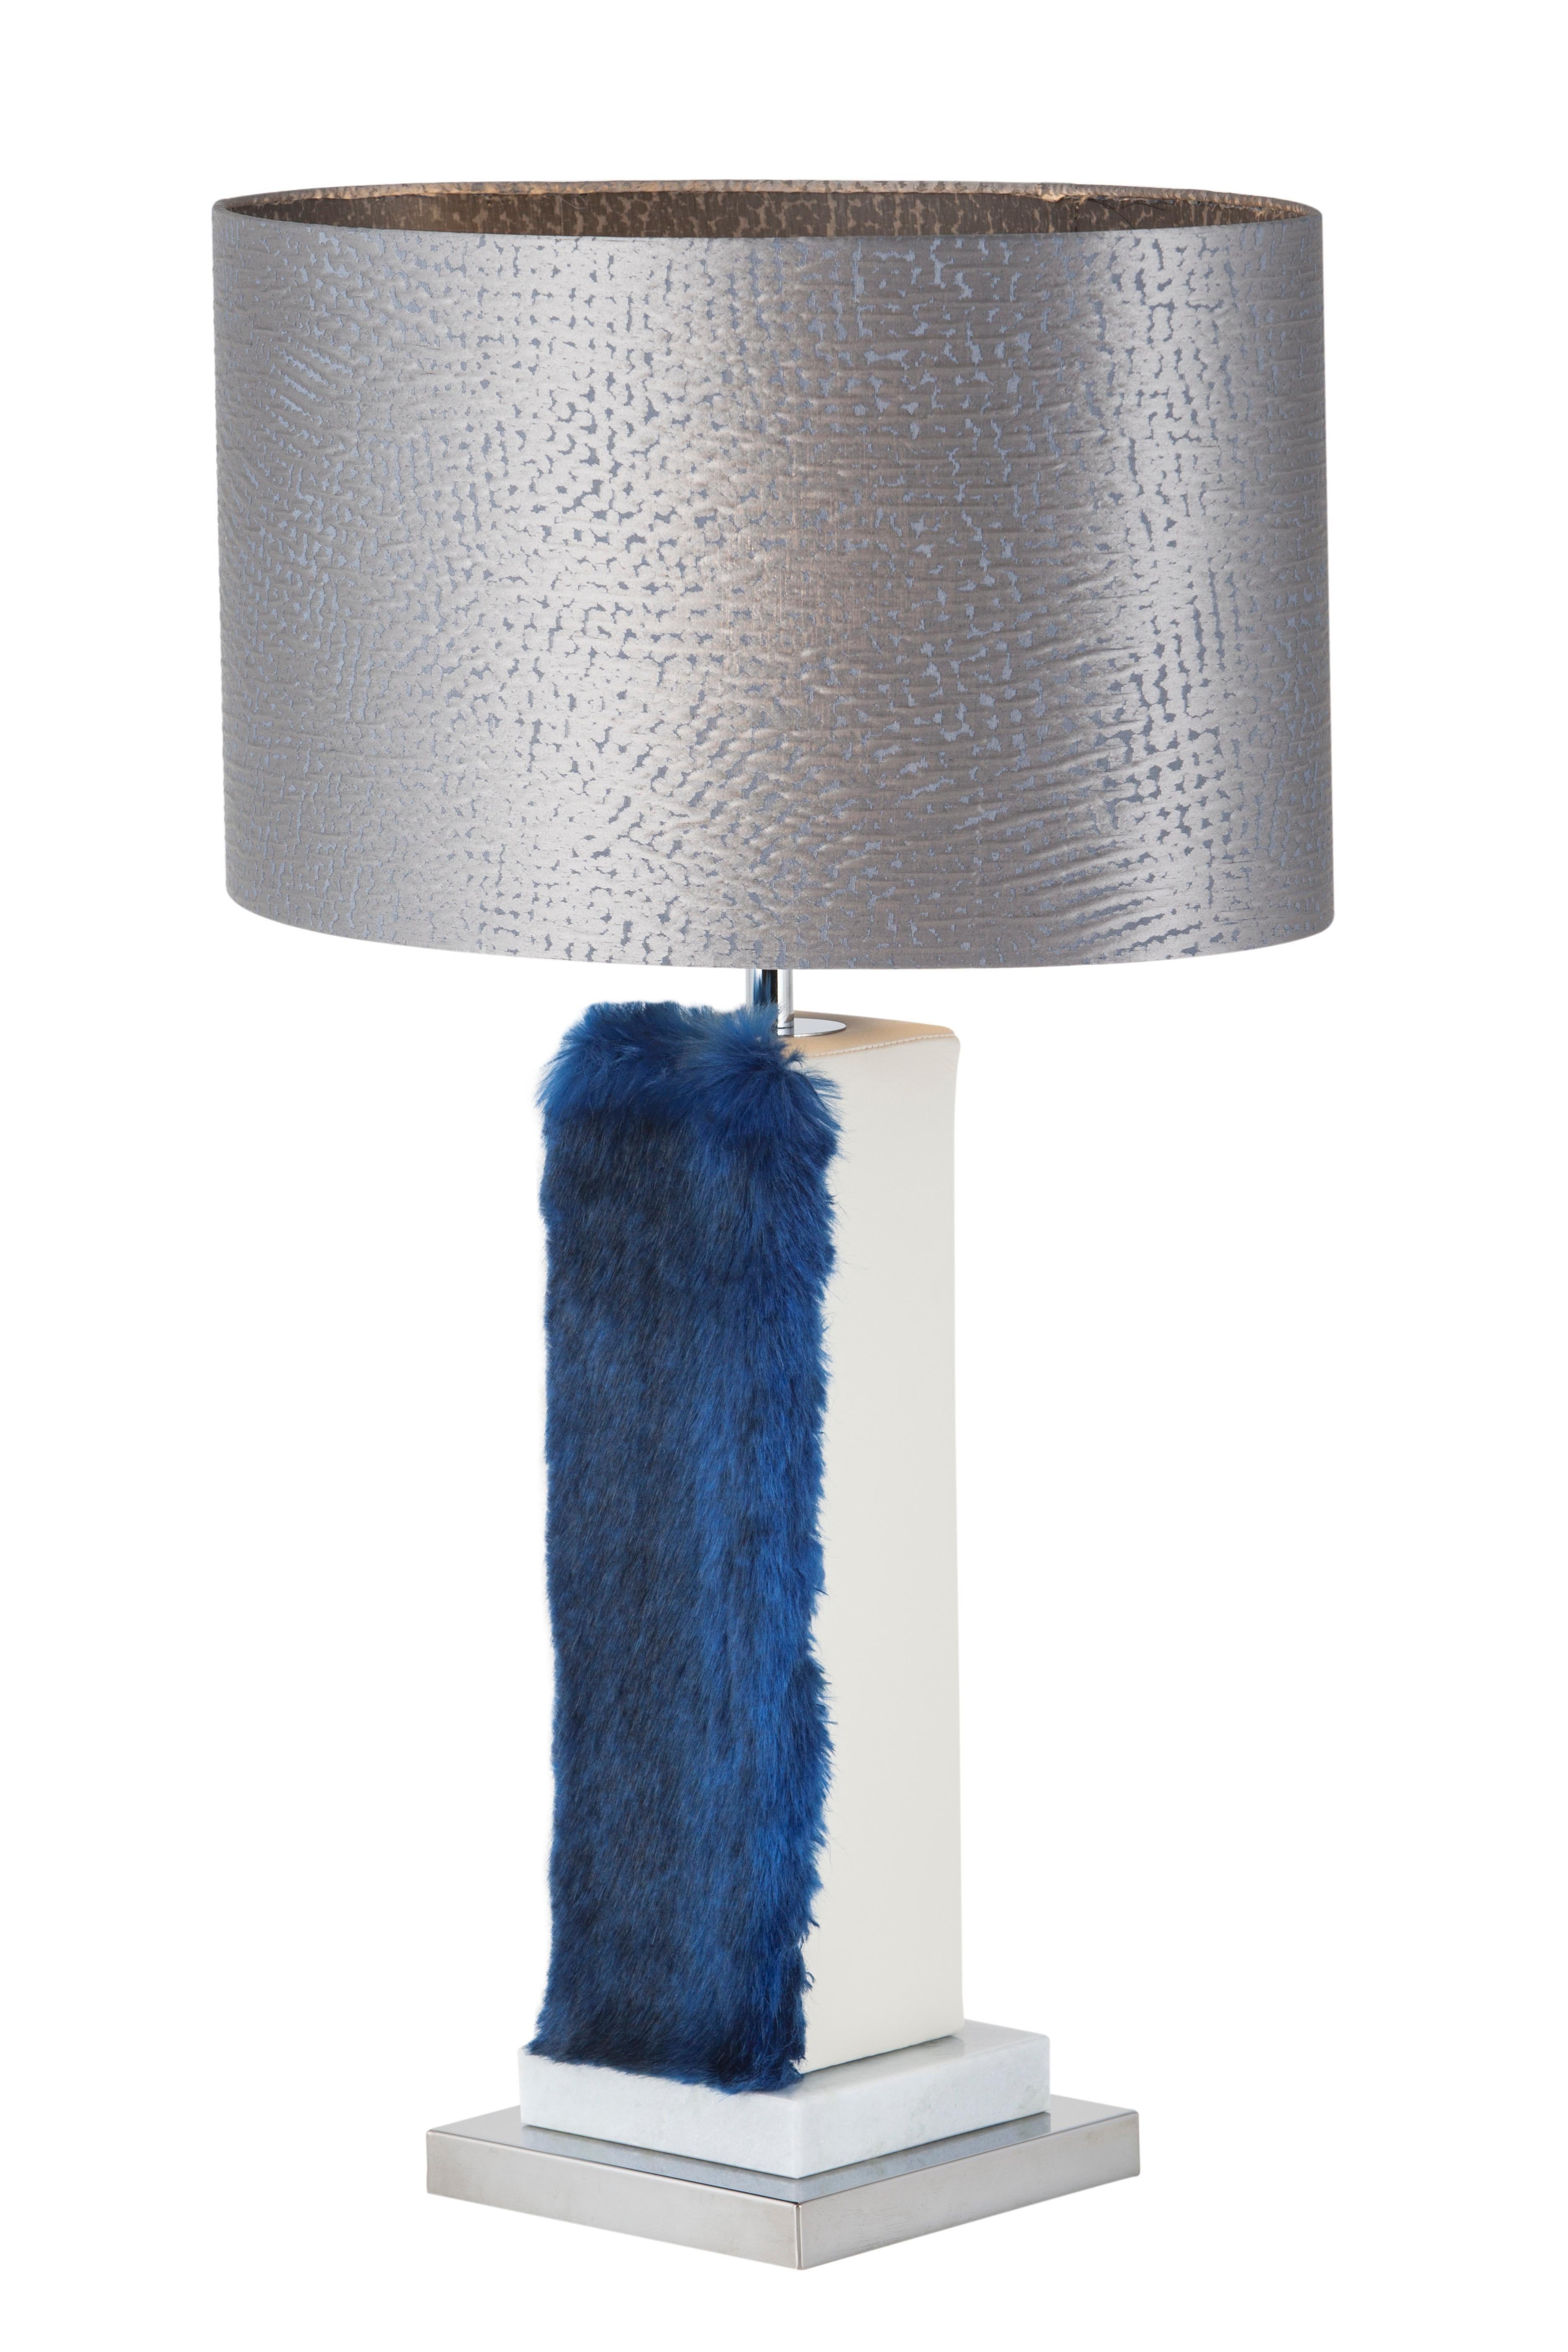 Set of 2 Art Deco Simões Table Lamp, Blue Faux Fur Handmade Portugal Greenapple In New Condition For Sale In Lisboa, PT